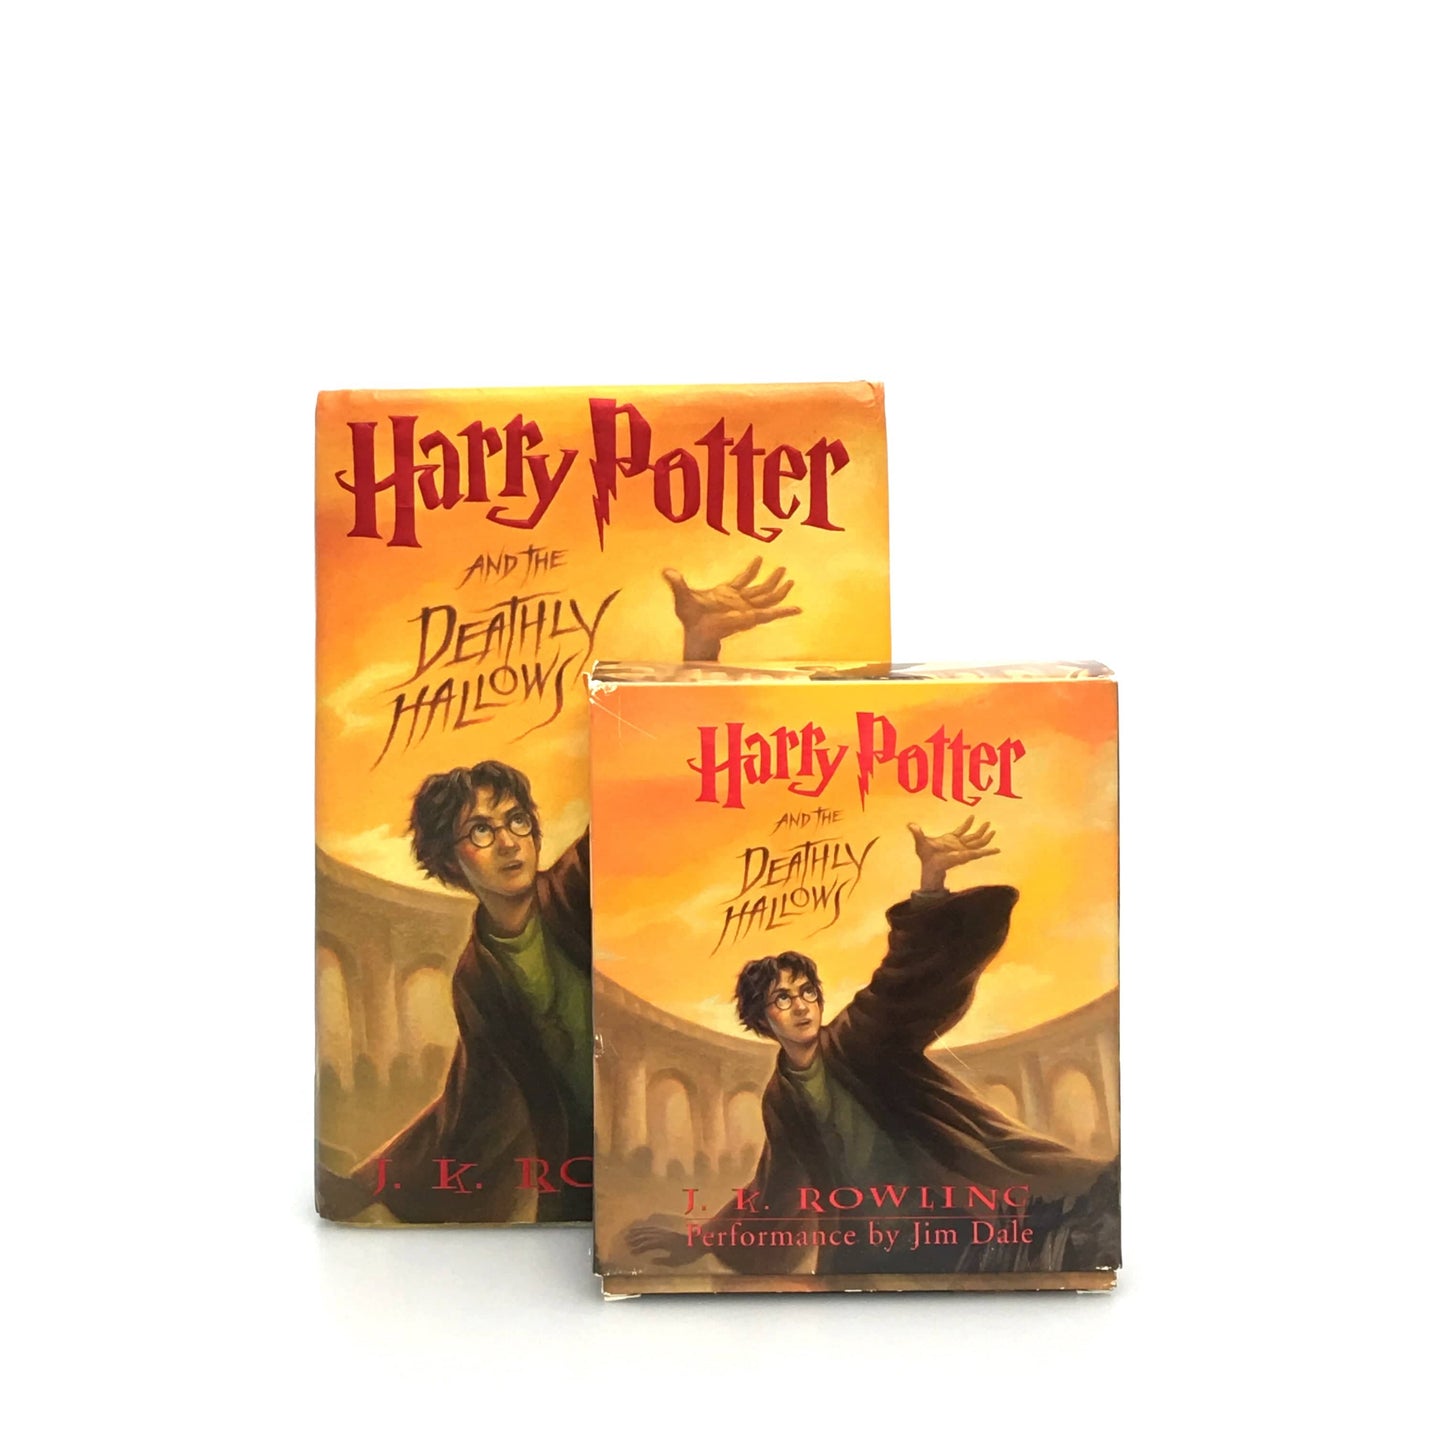 Harry Potter And The Deathly Hallows Hardback & Audio CD 17 Discs J. K. Rowling